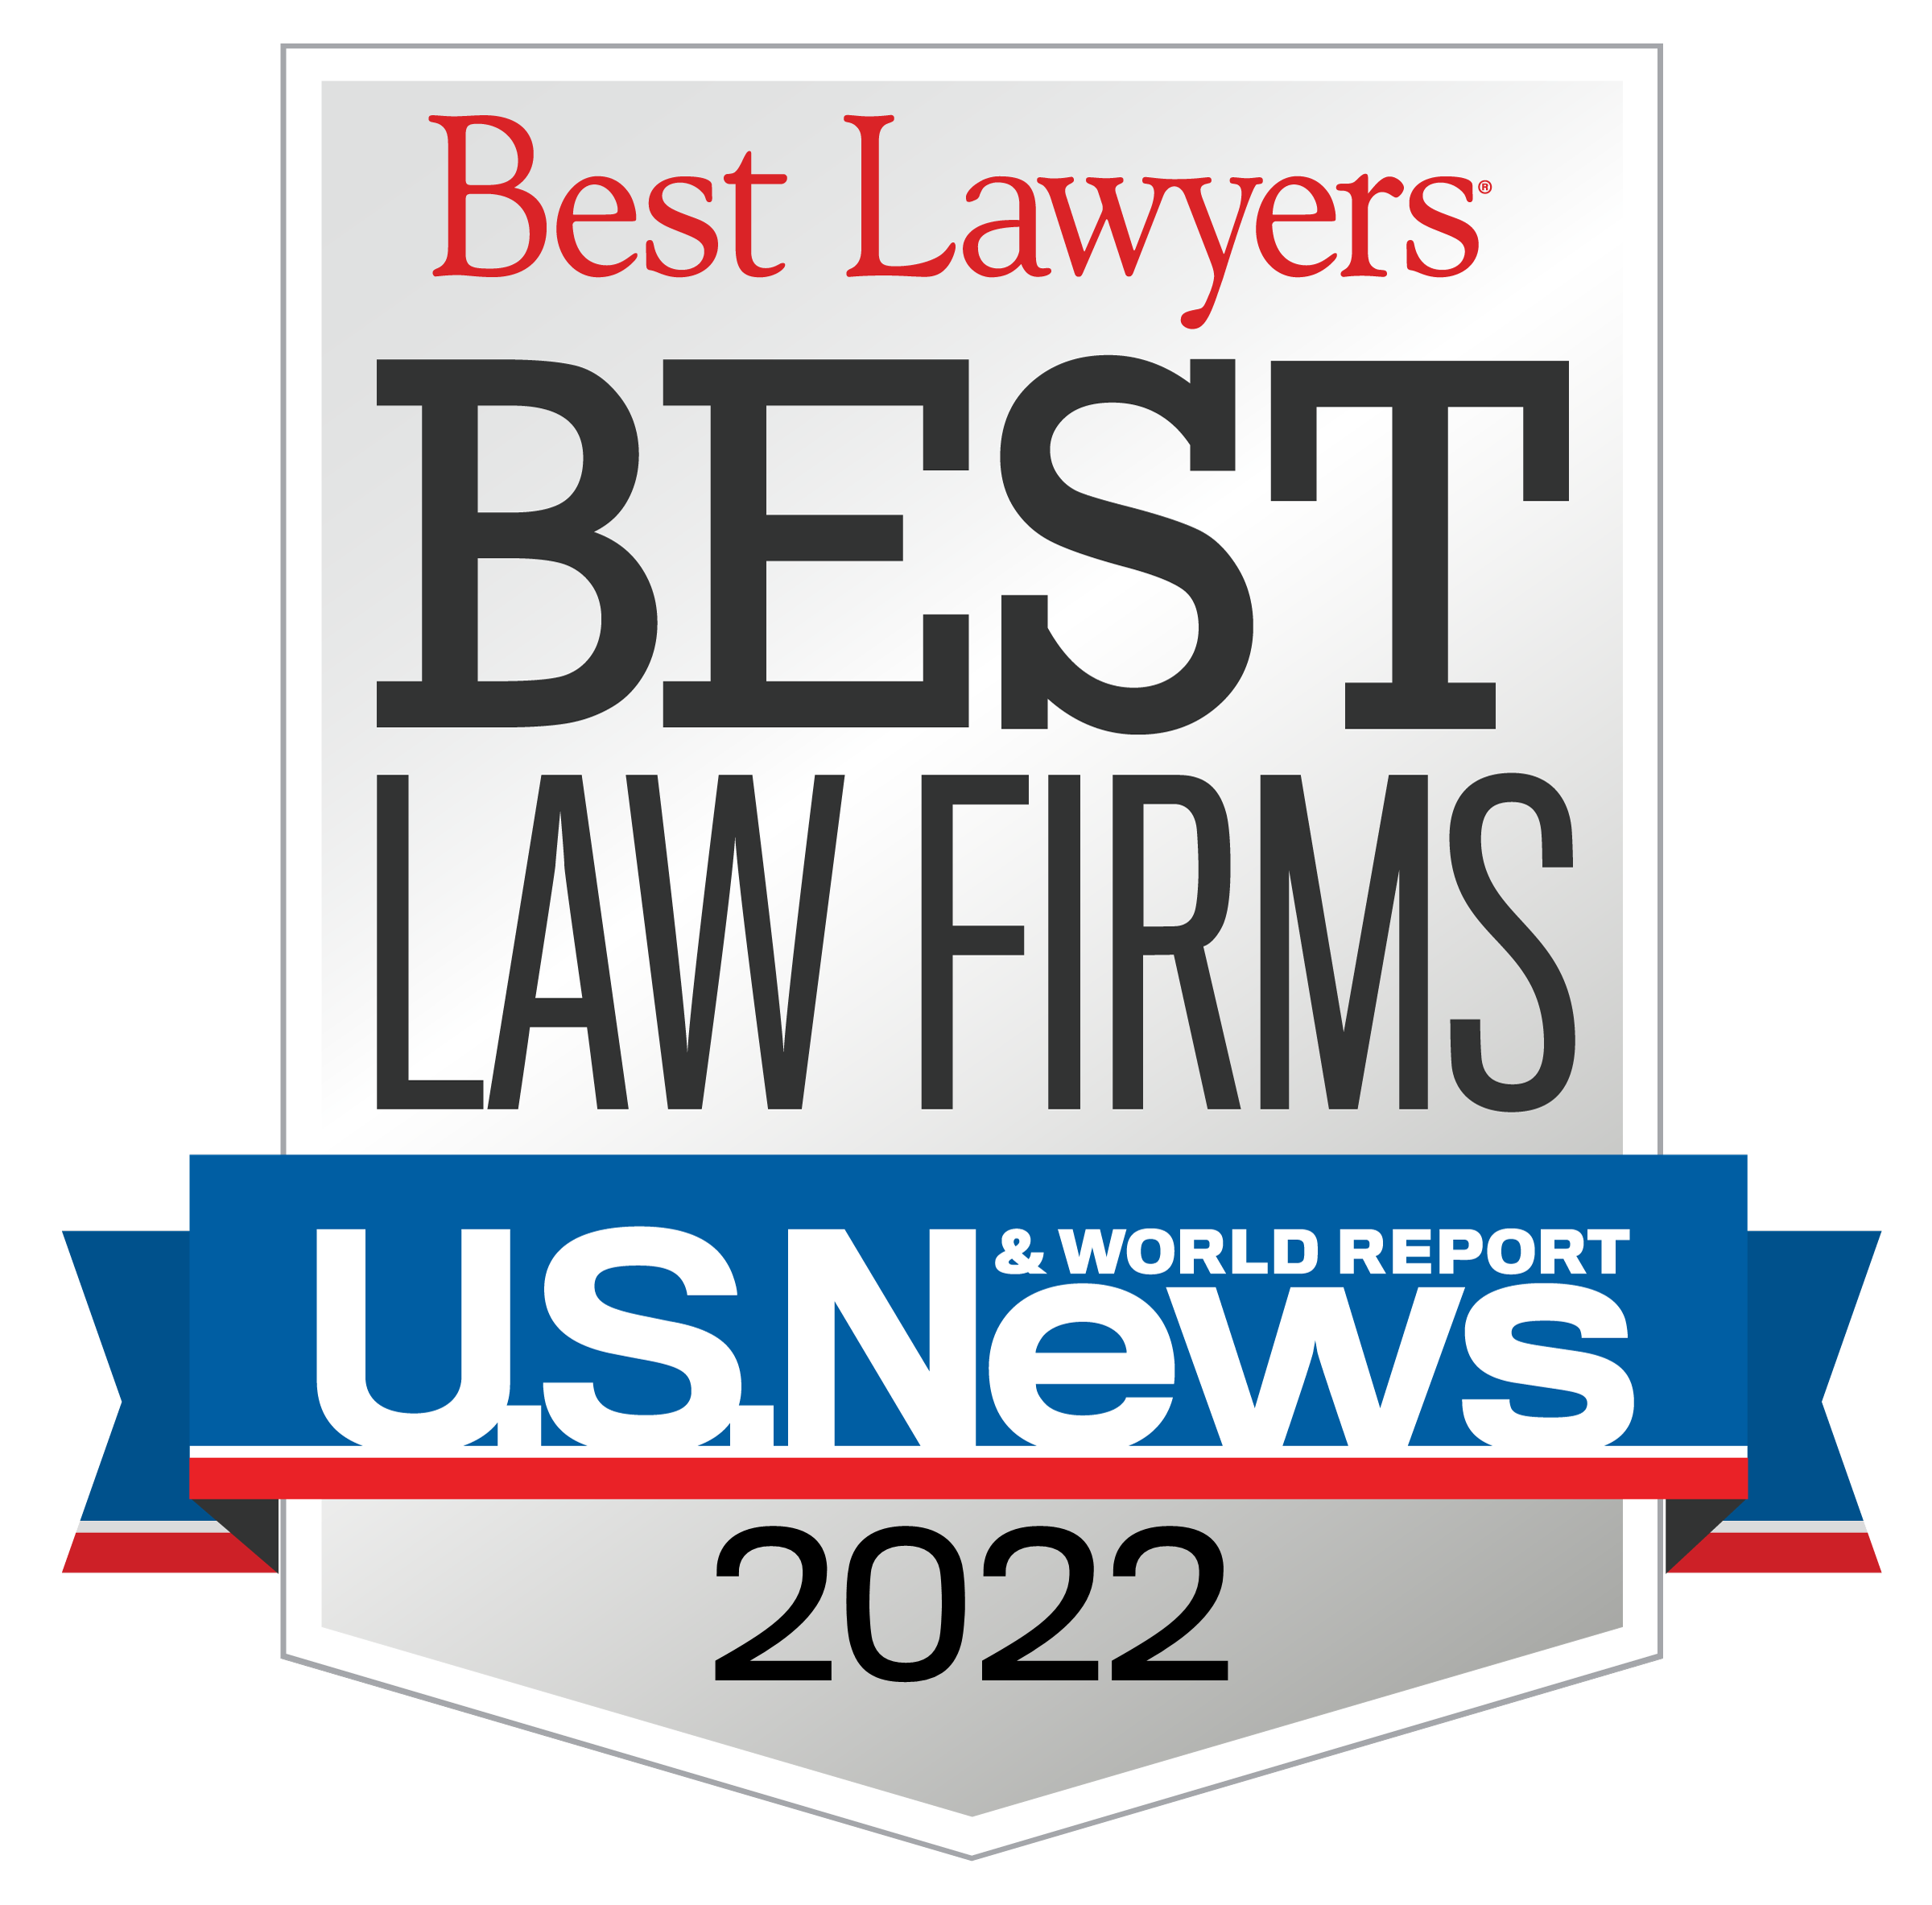 Best Law Firms 2022 - Tremblay Beck Law, APC